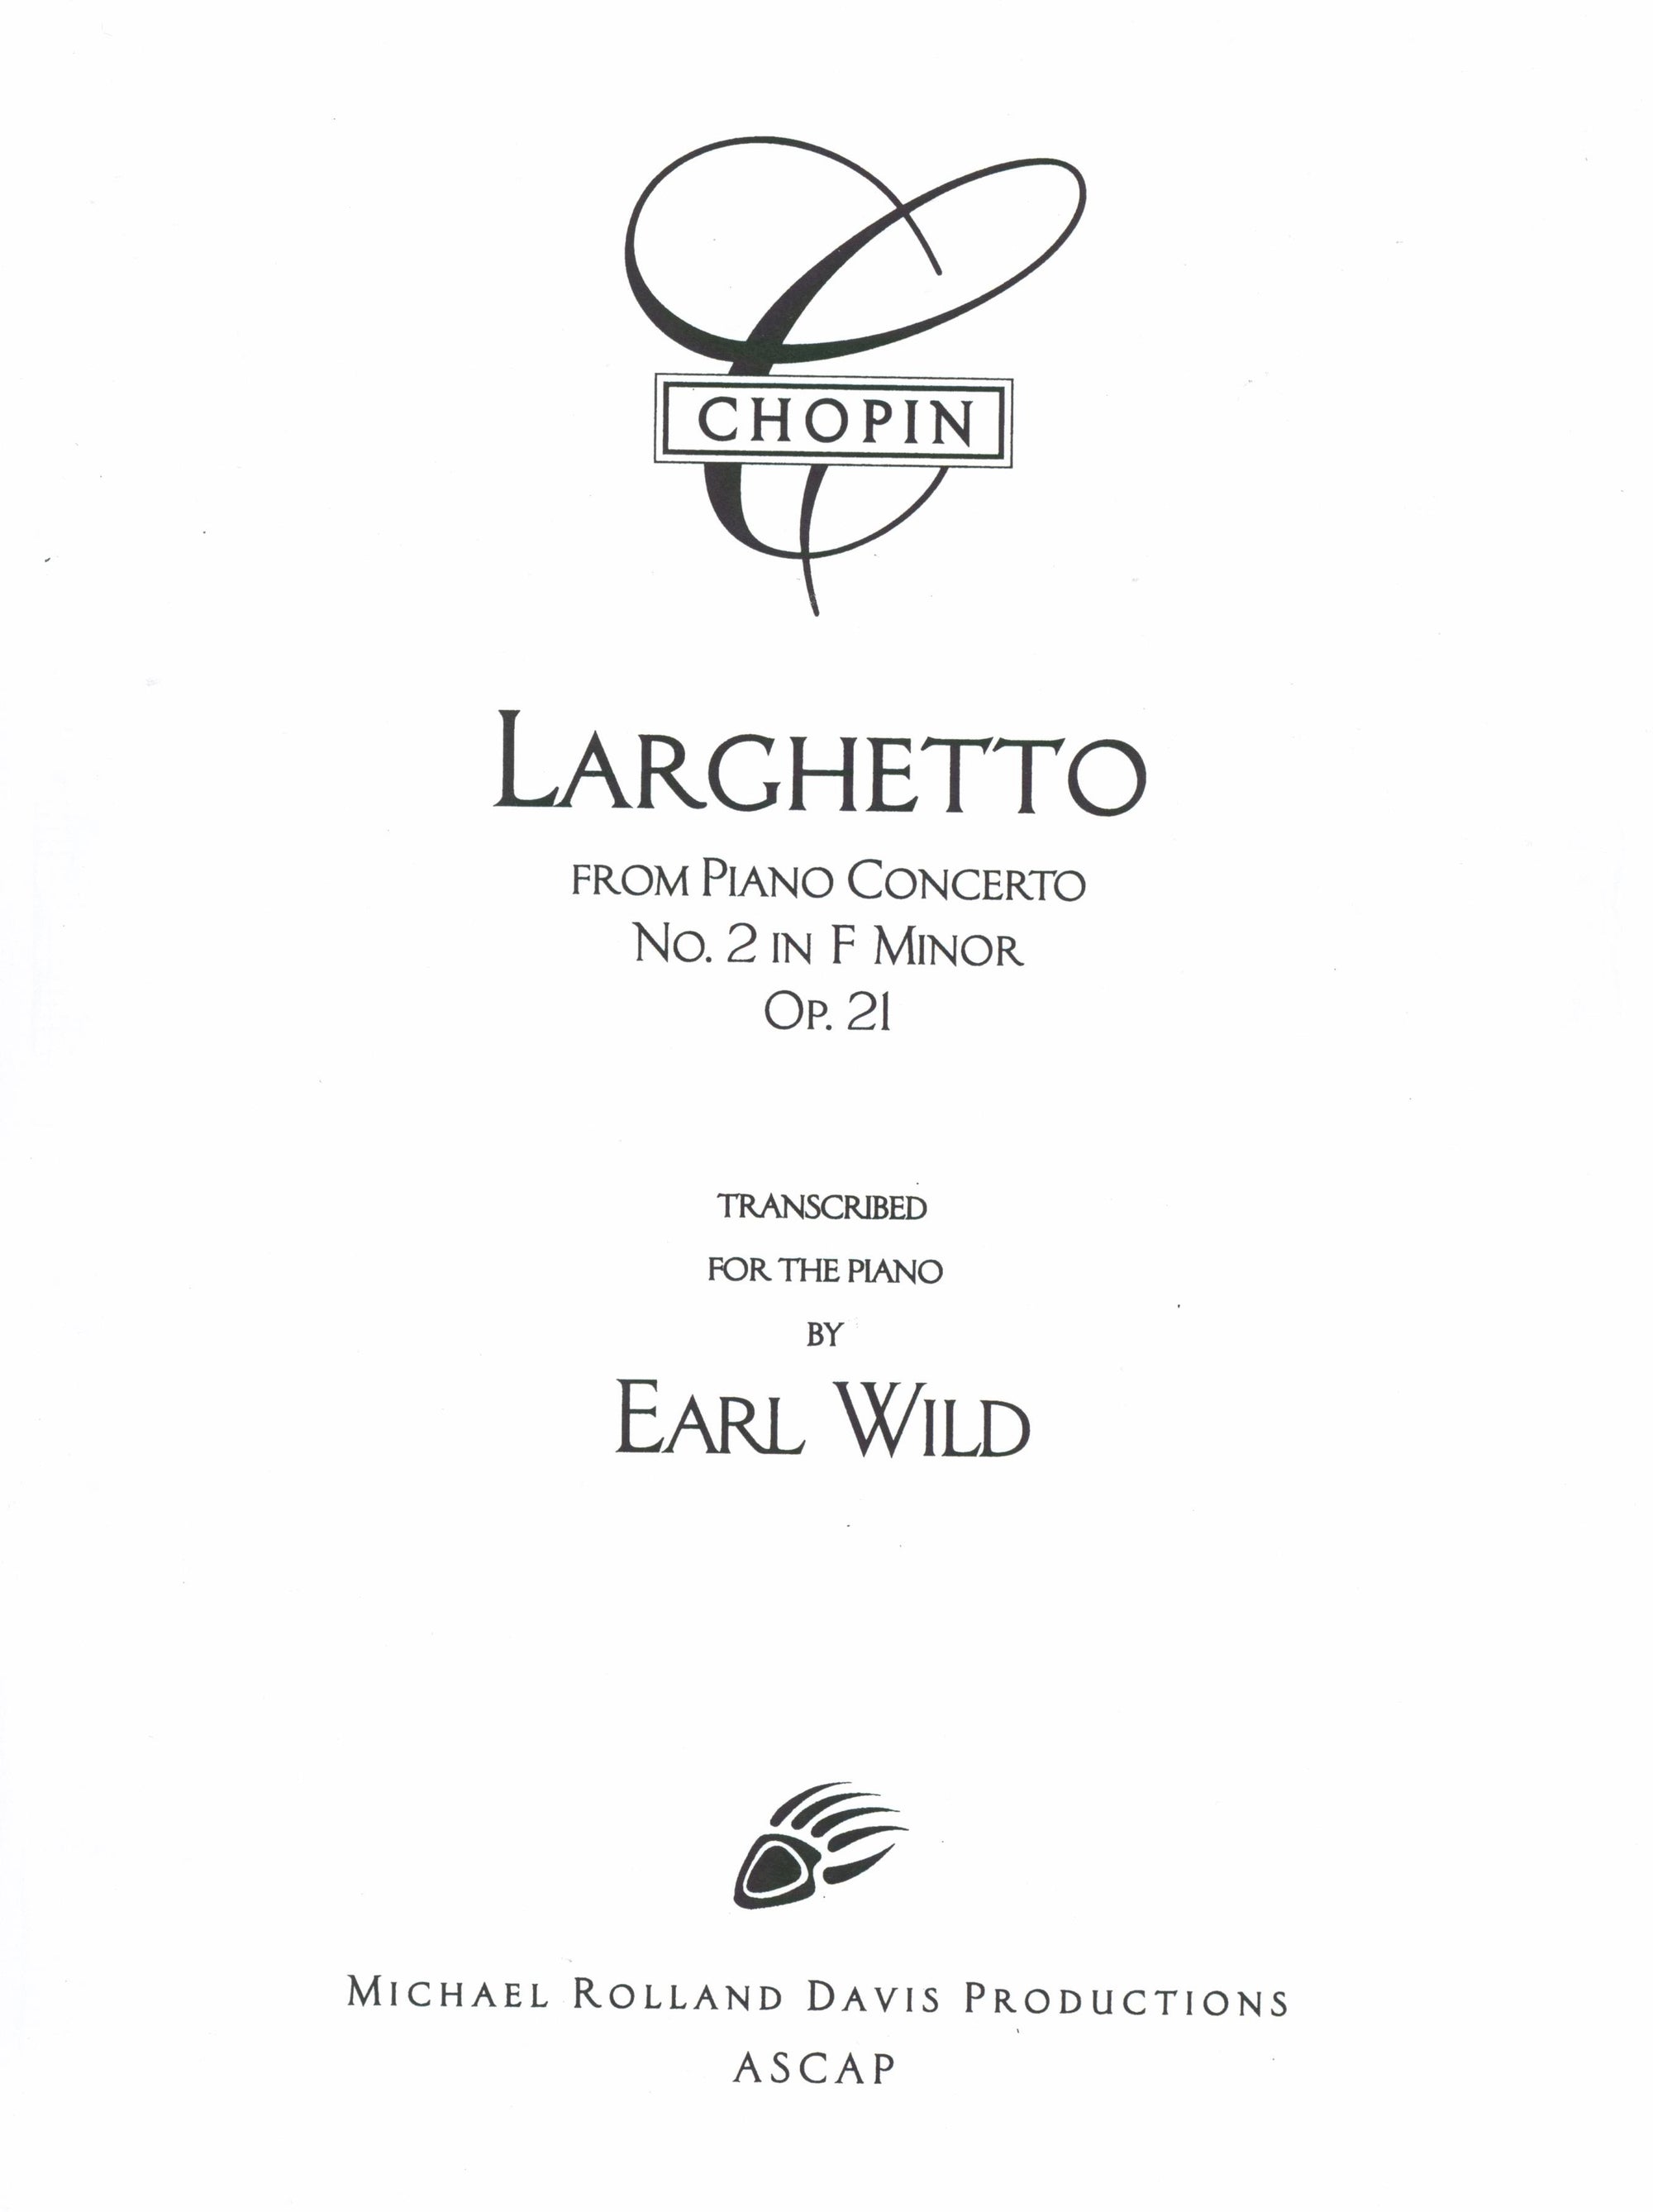 Chopin-Wild: 'Larghetto' from Piano Concerto, Op. 21